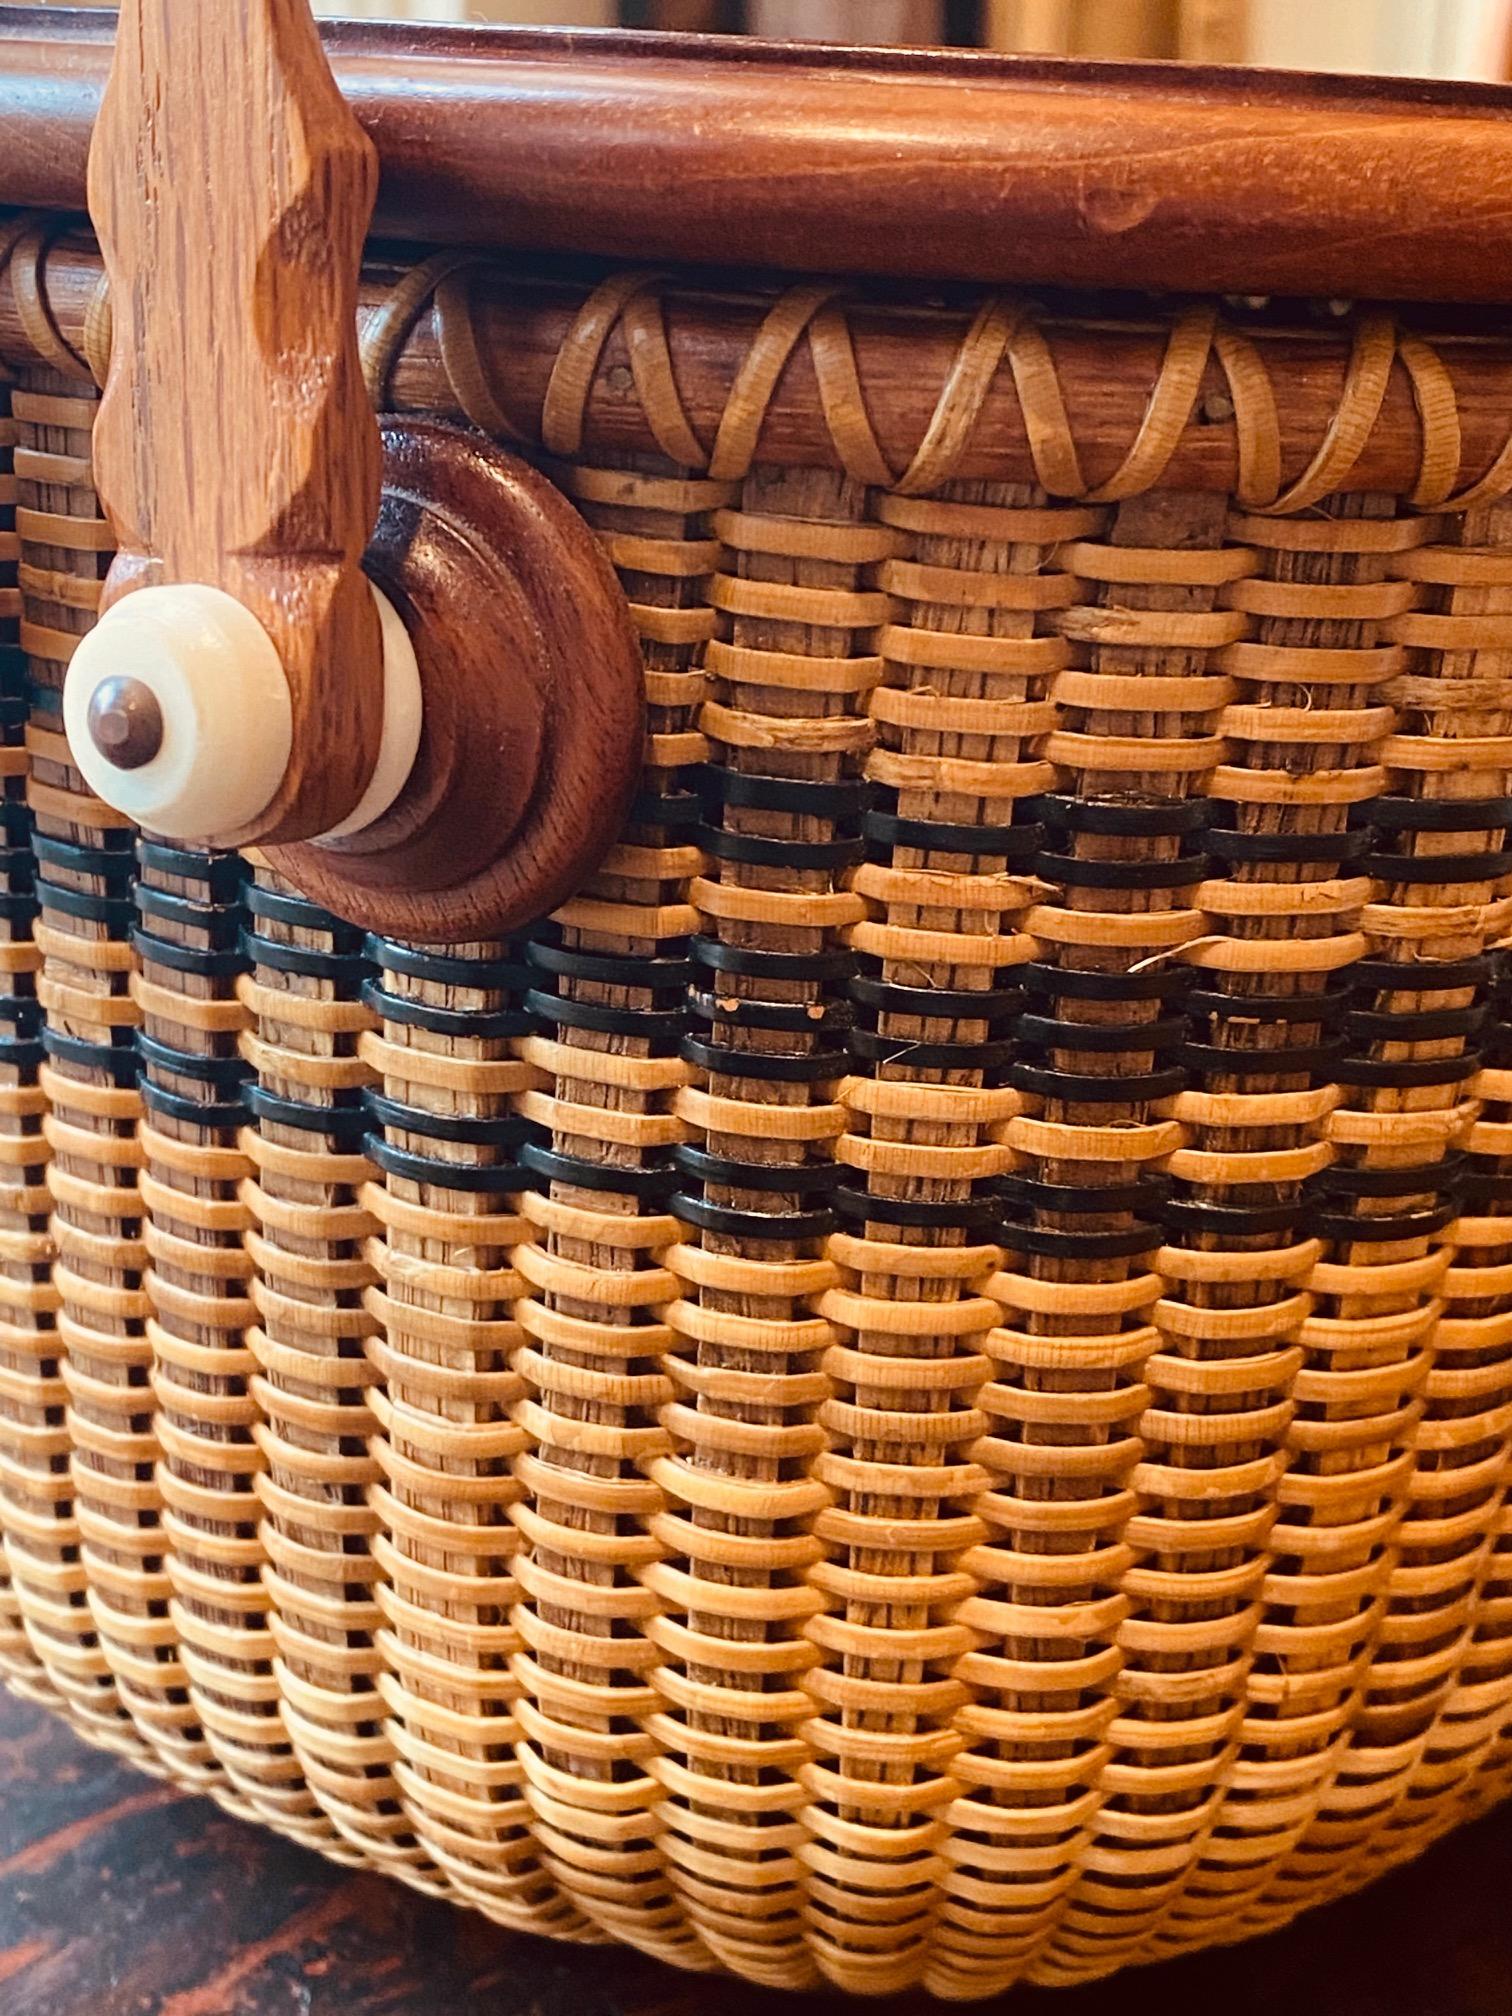 Folk Art Nantucket Basket with Stencil Decorated Top, by Harry Hilbert, 1995 For Sale